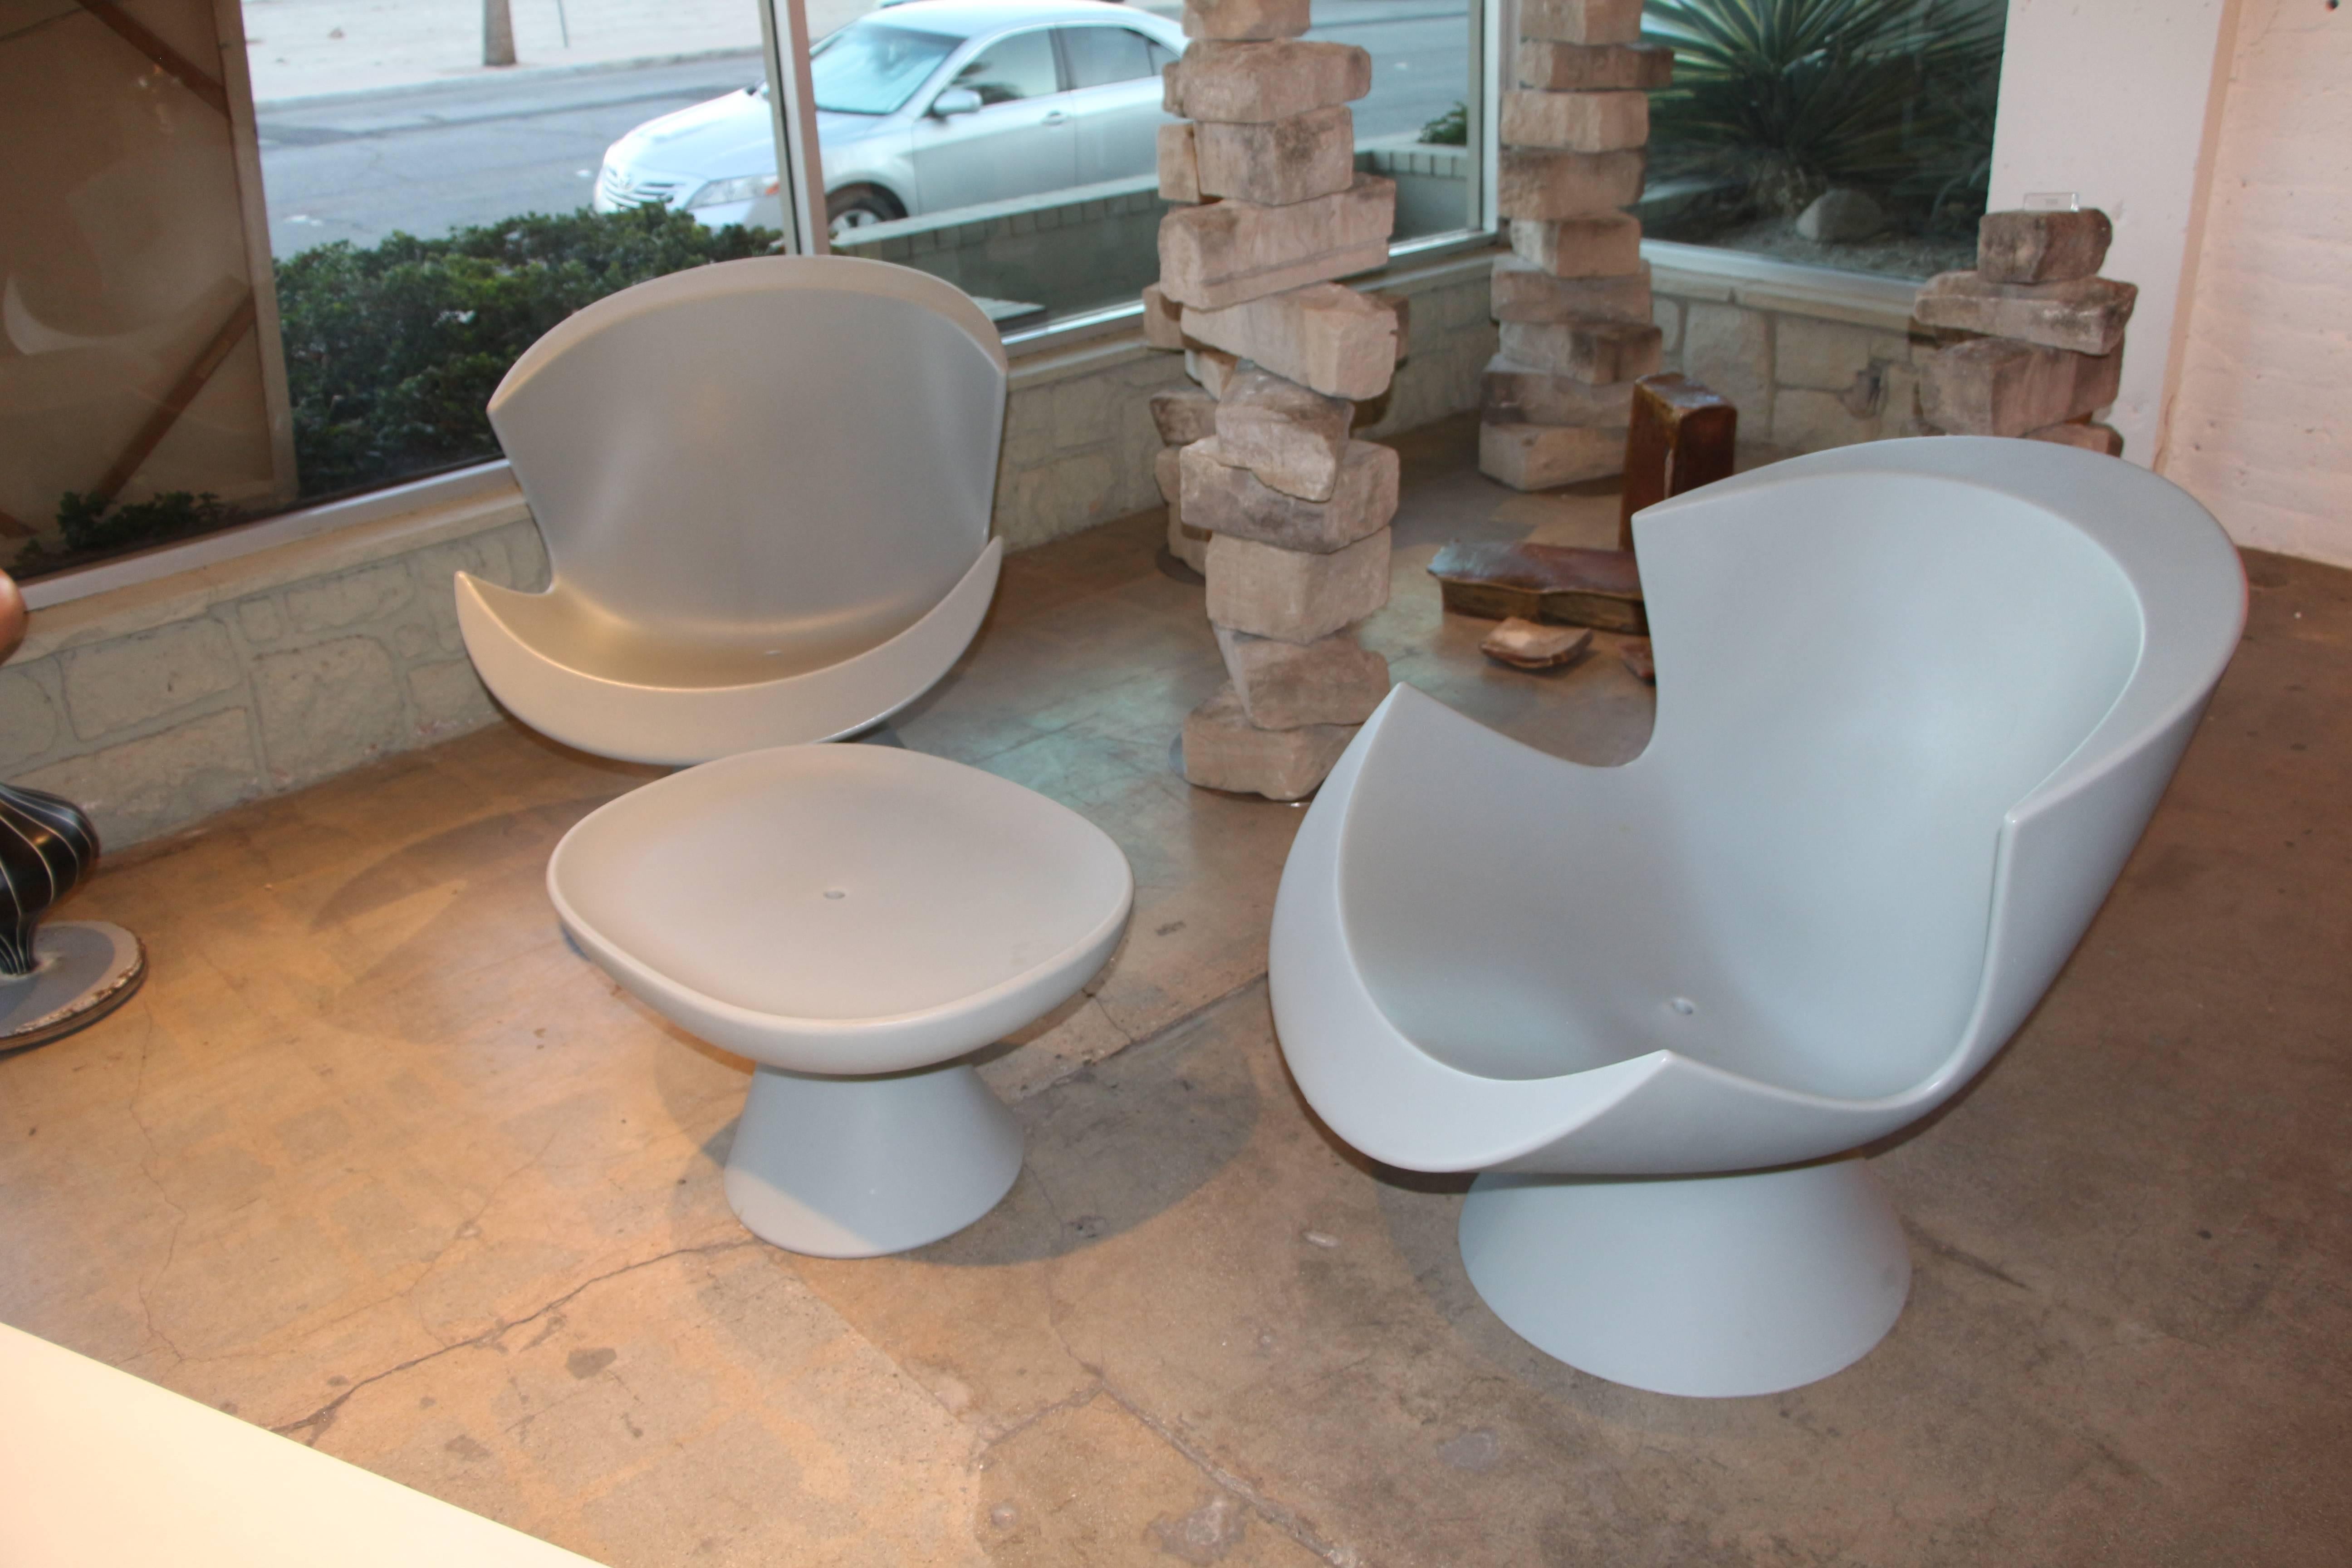 Karim Rashid designed these Kite Chairs and Mini Kite ottoman for Label of the Netherlands in 2004. They were sold I believe through DWR and are no longer in production. As Karim Rashid's fame has grown as a designed I Believe these chairs will only